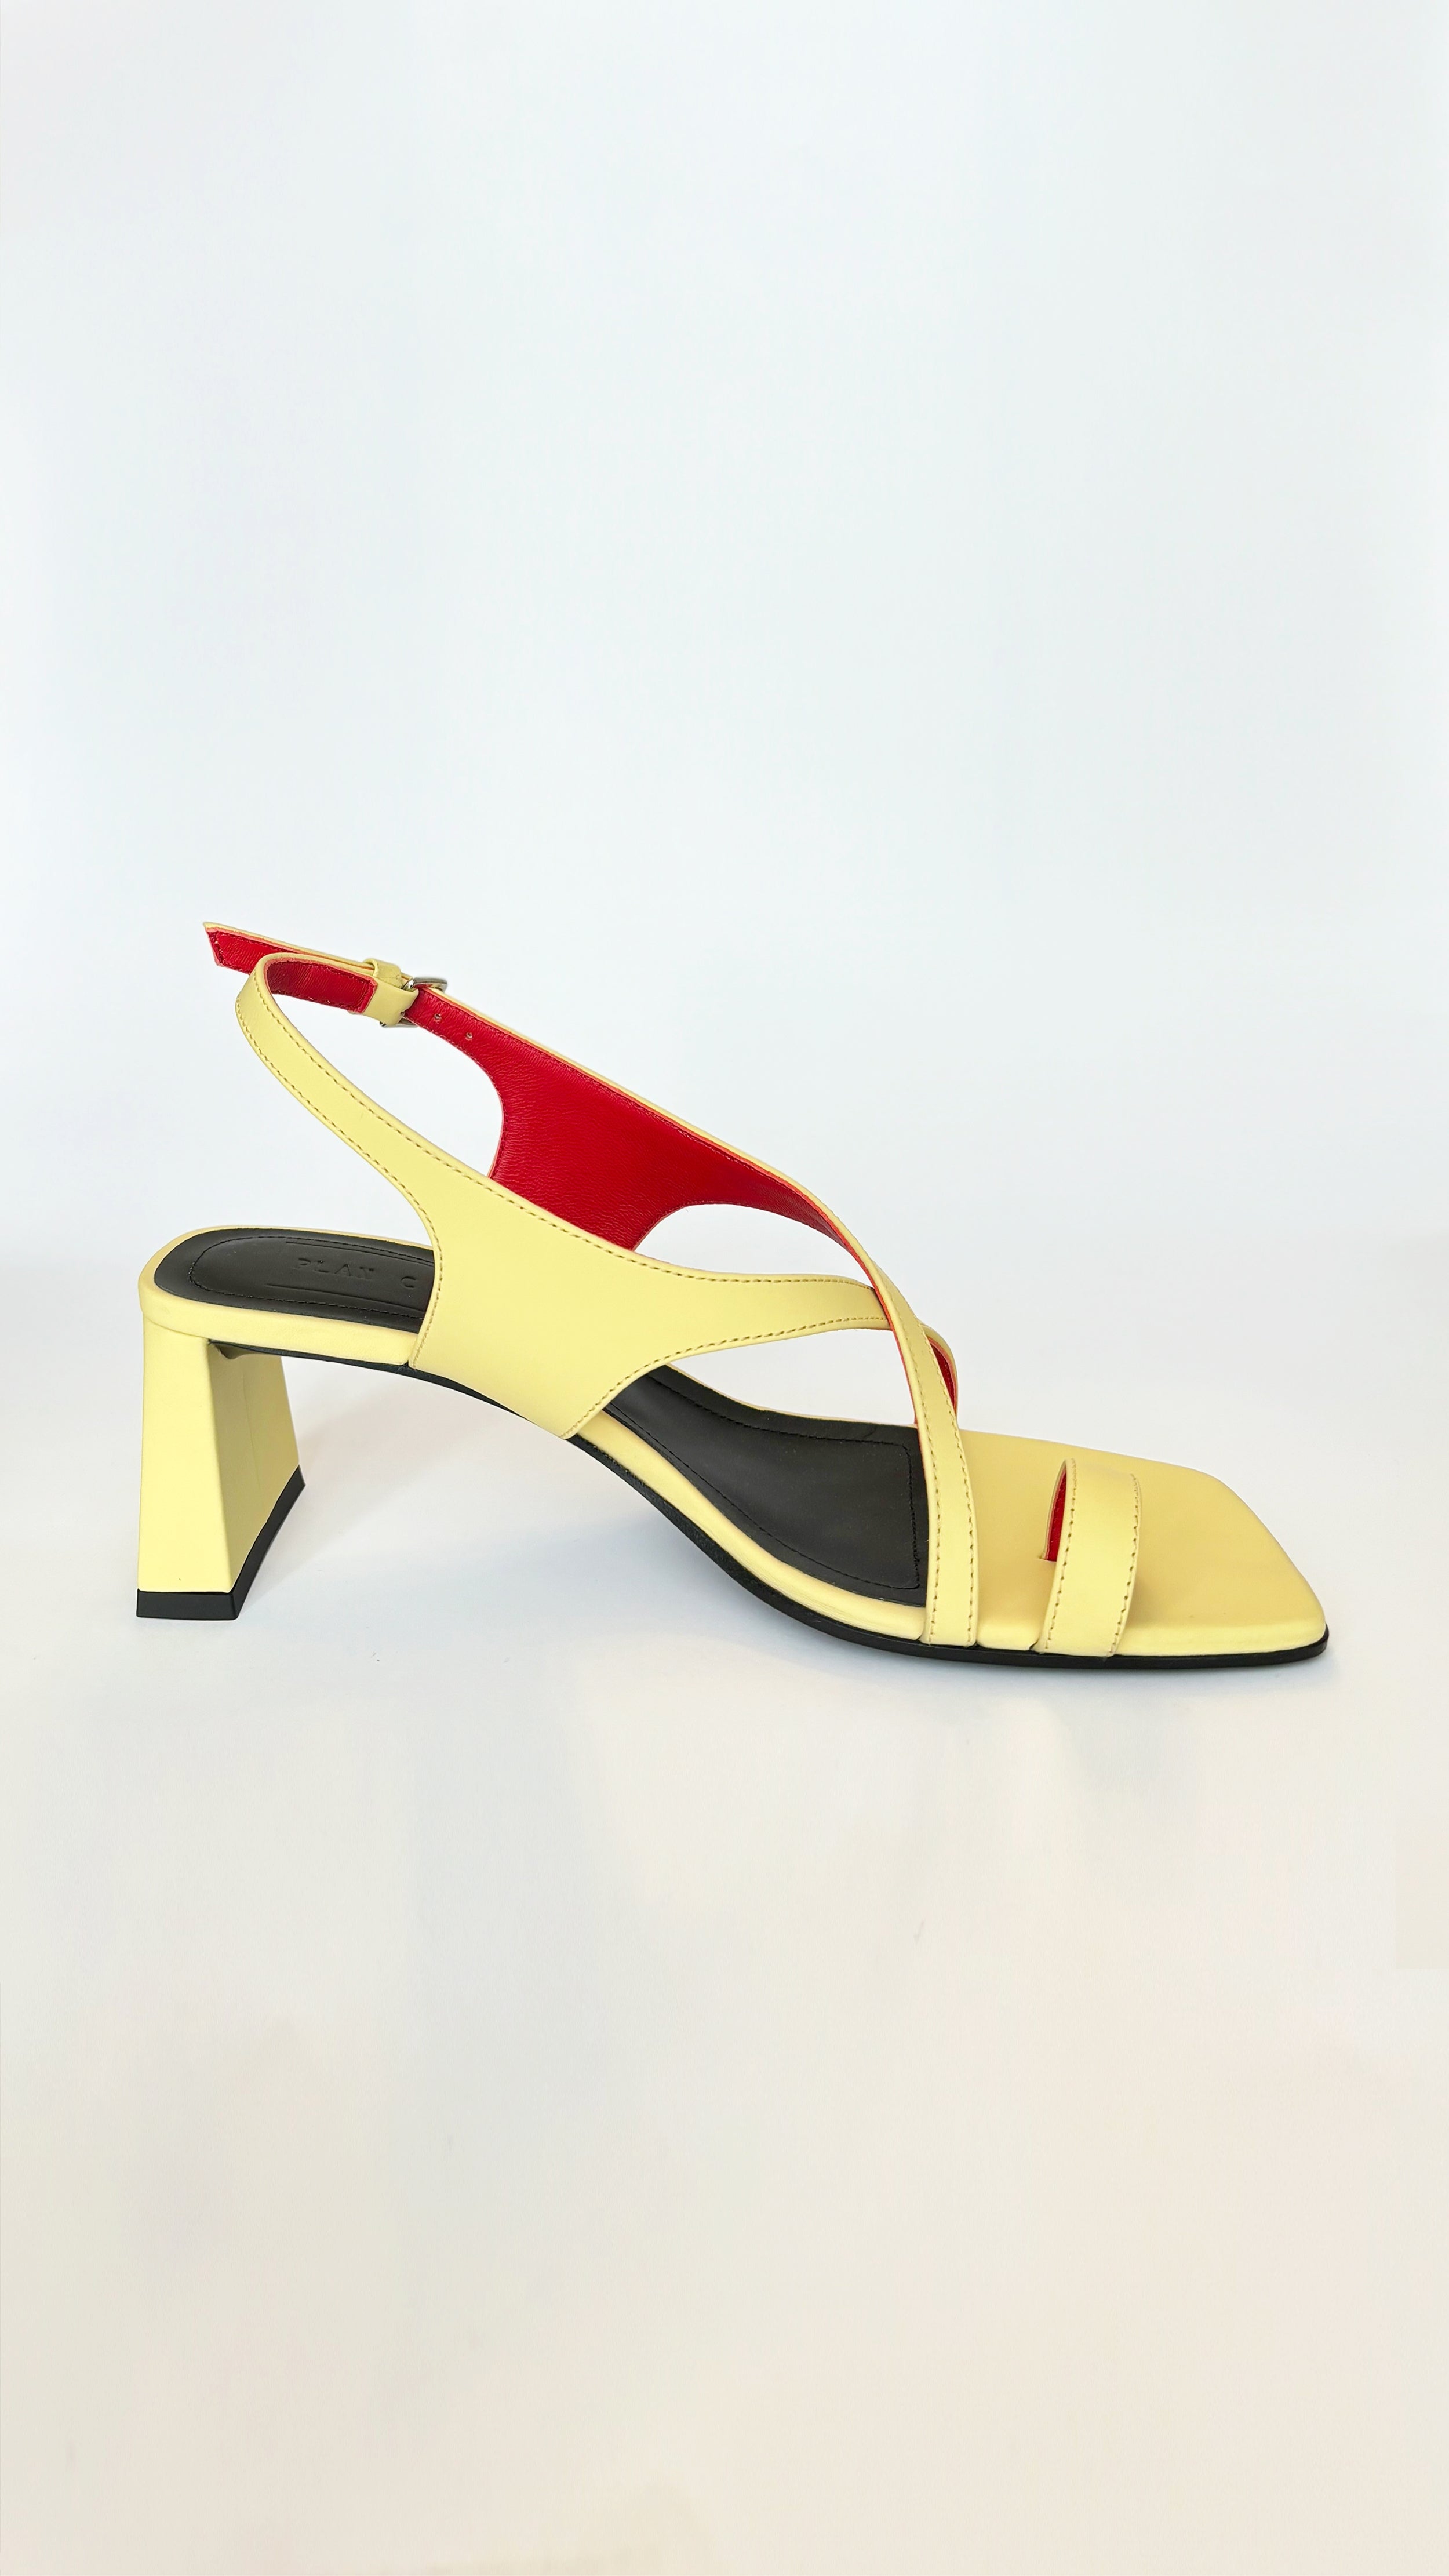 Plan C Crisscross Toe-Loop Slingback Sandals. In yellow leather exterior with a pop of red interior. It features one toe loop, open toe heeled sandal with a criss cross of leather acorss the top. Stack heel in the back. Pair shown showing side interior view.